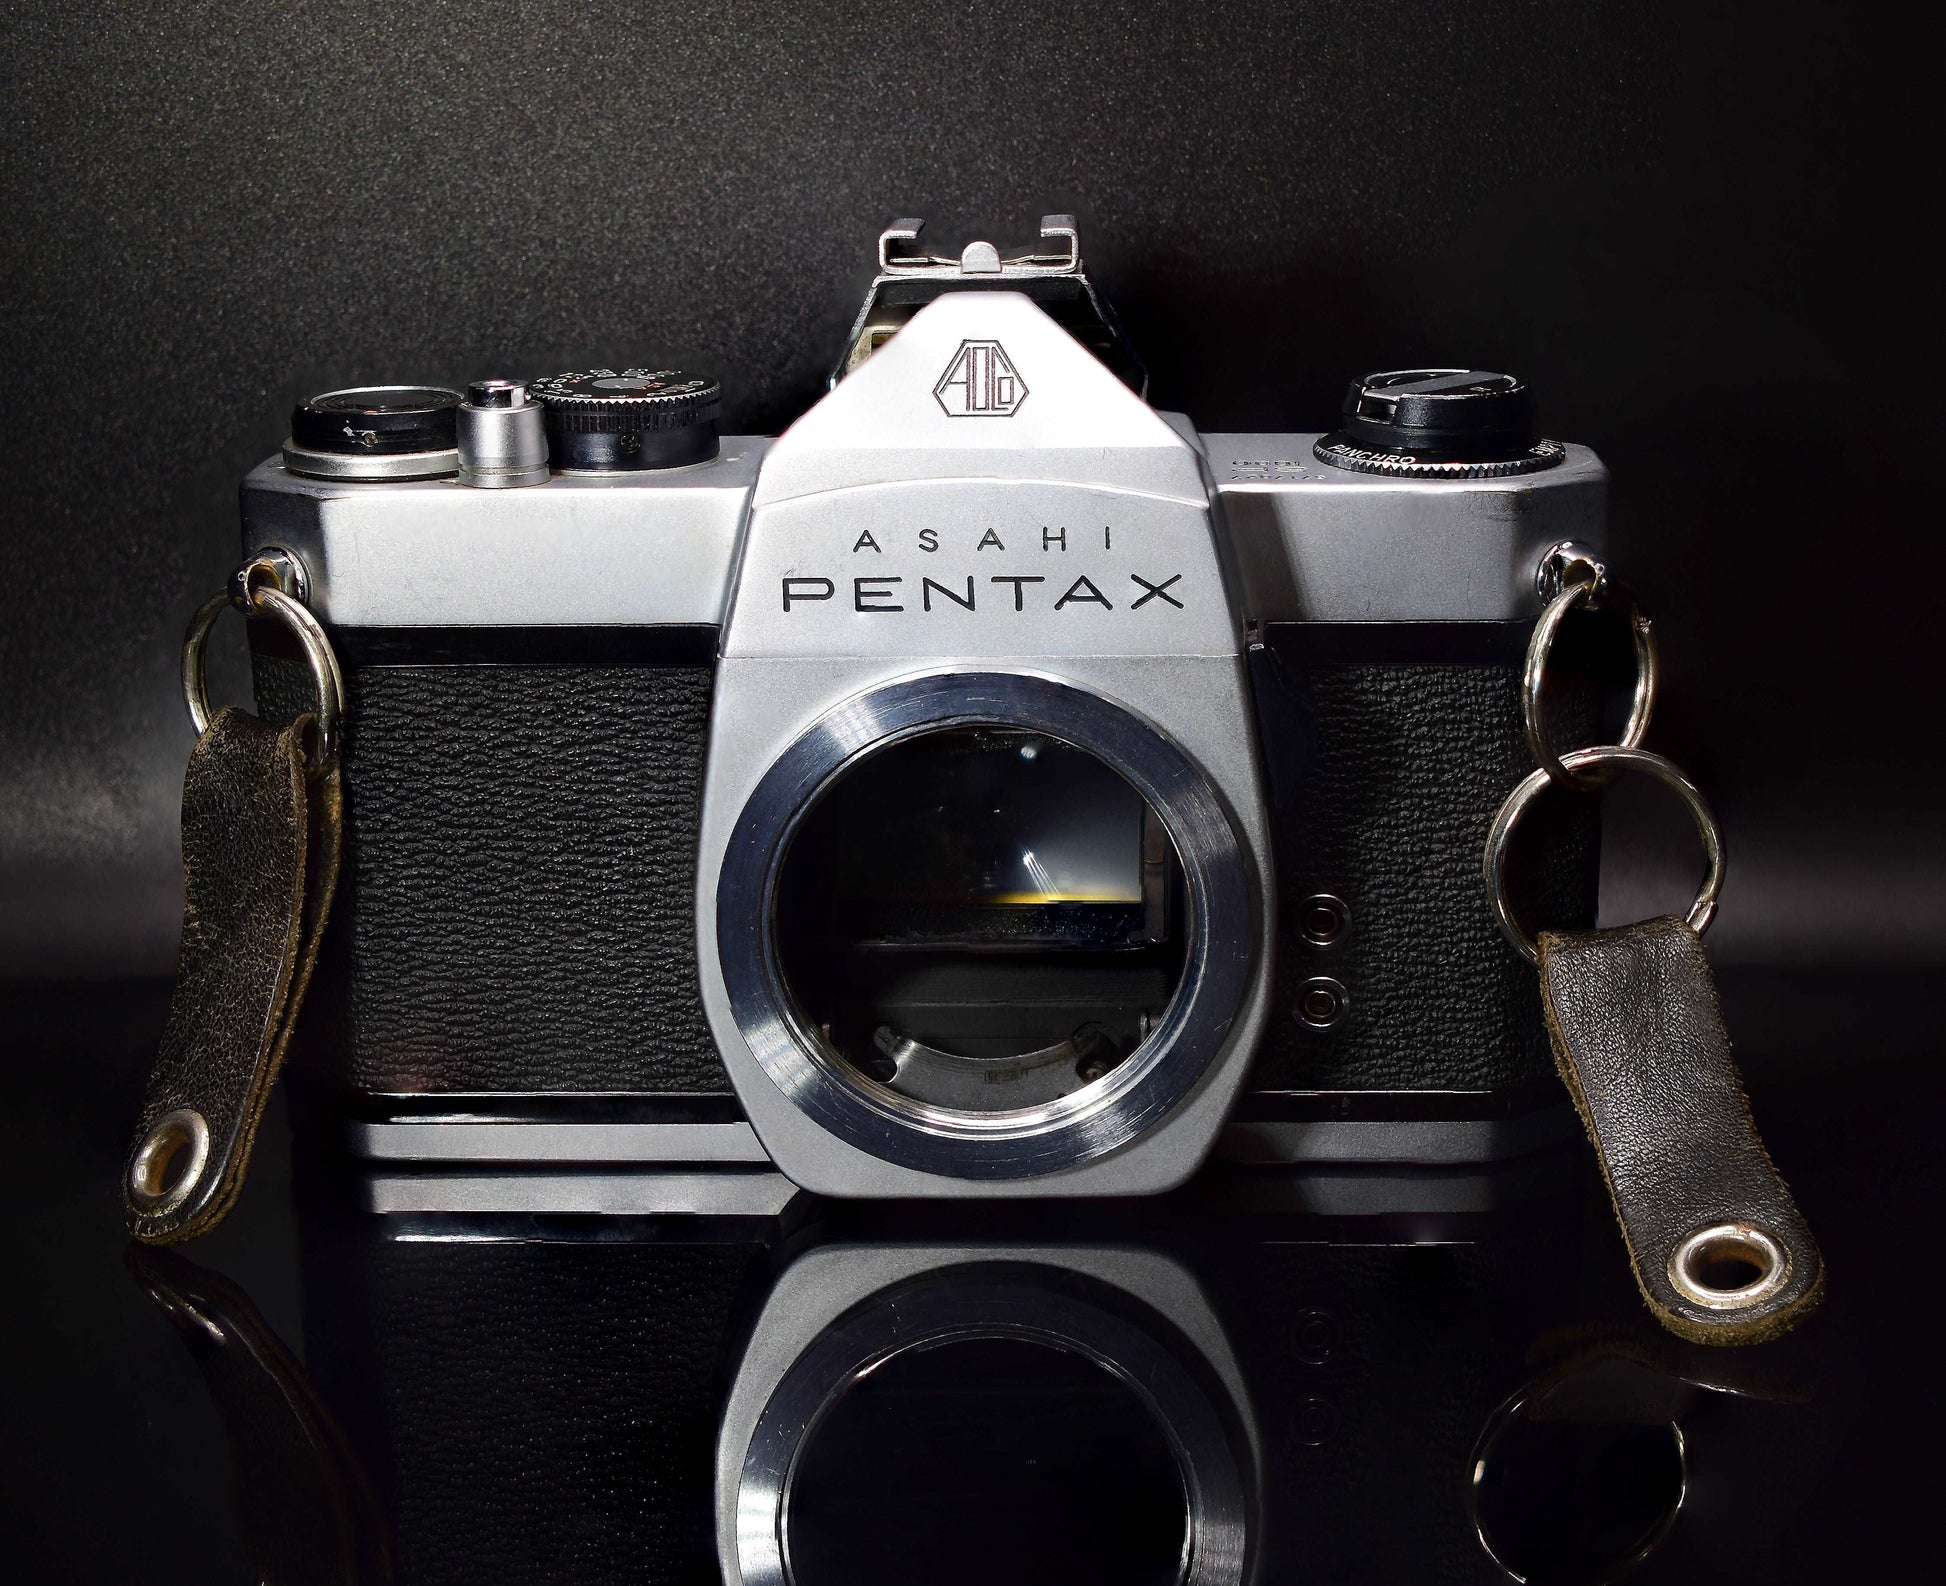 ASAHI Pentax SP1000 35mm Film SLR Camera with SIGMA f/3.5 28-70mm Zoom Lens and Detachable Cold Shoe Attachment